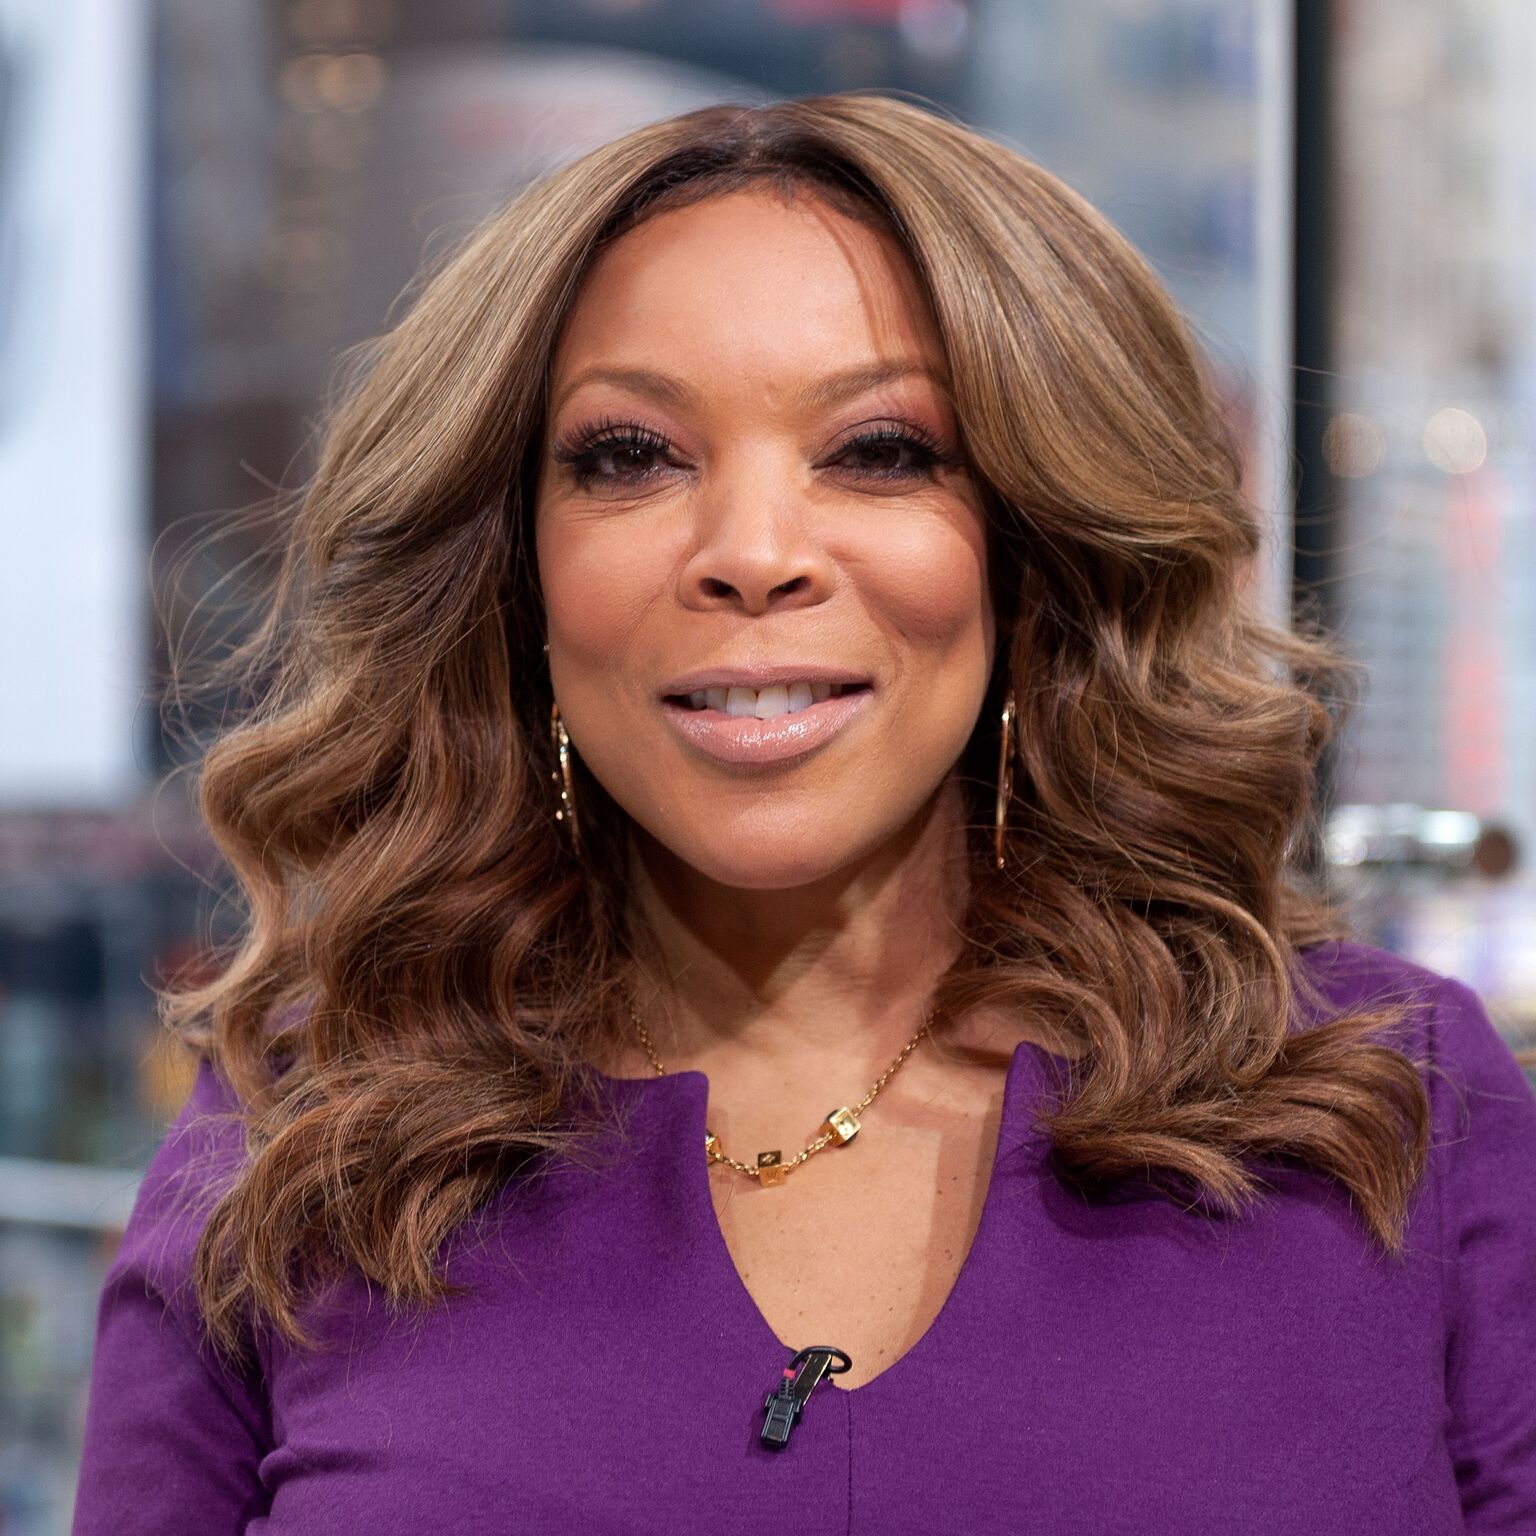 Wendy Williams visits "Extra" at their New York studios at H&M in Times Square on January 21, 2015 in New York City. | Source: Getty Images